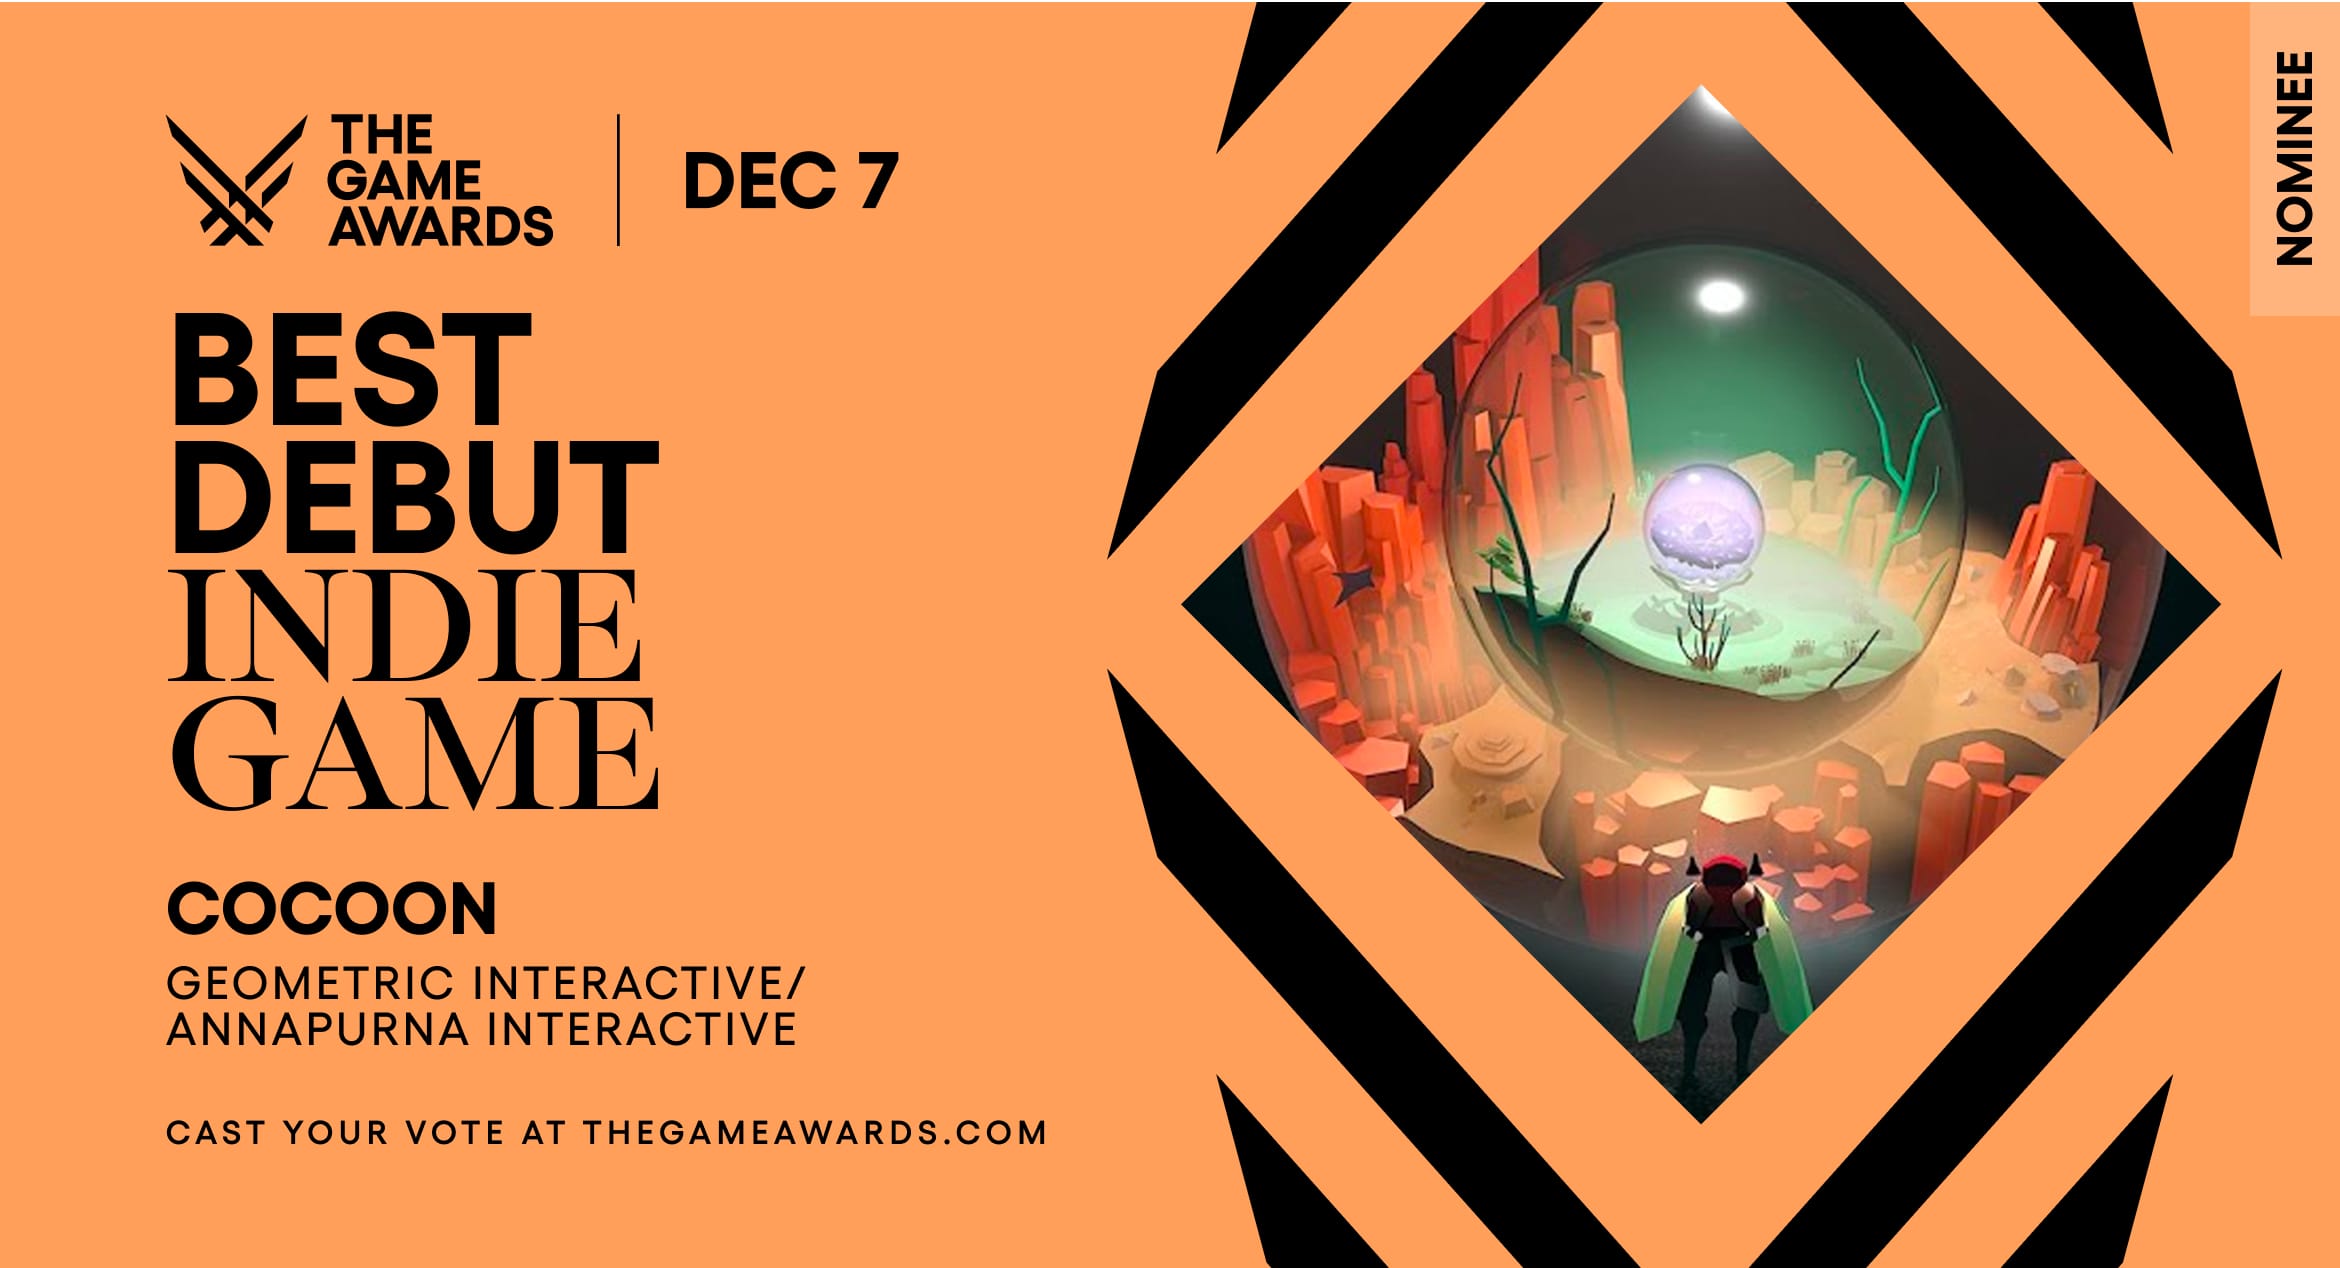 Here are the nominees for BEST DEBUT INDIE GAME 2022 #TheGameAwards #n